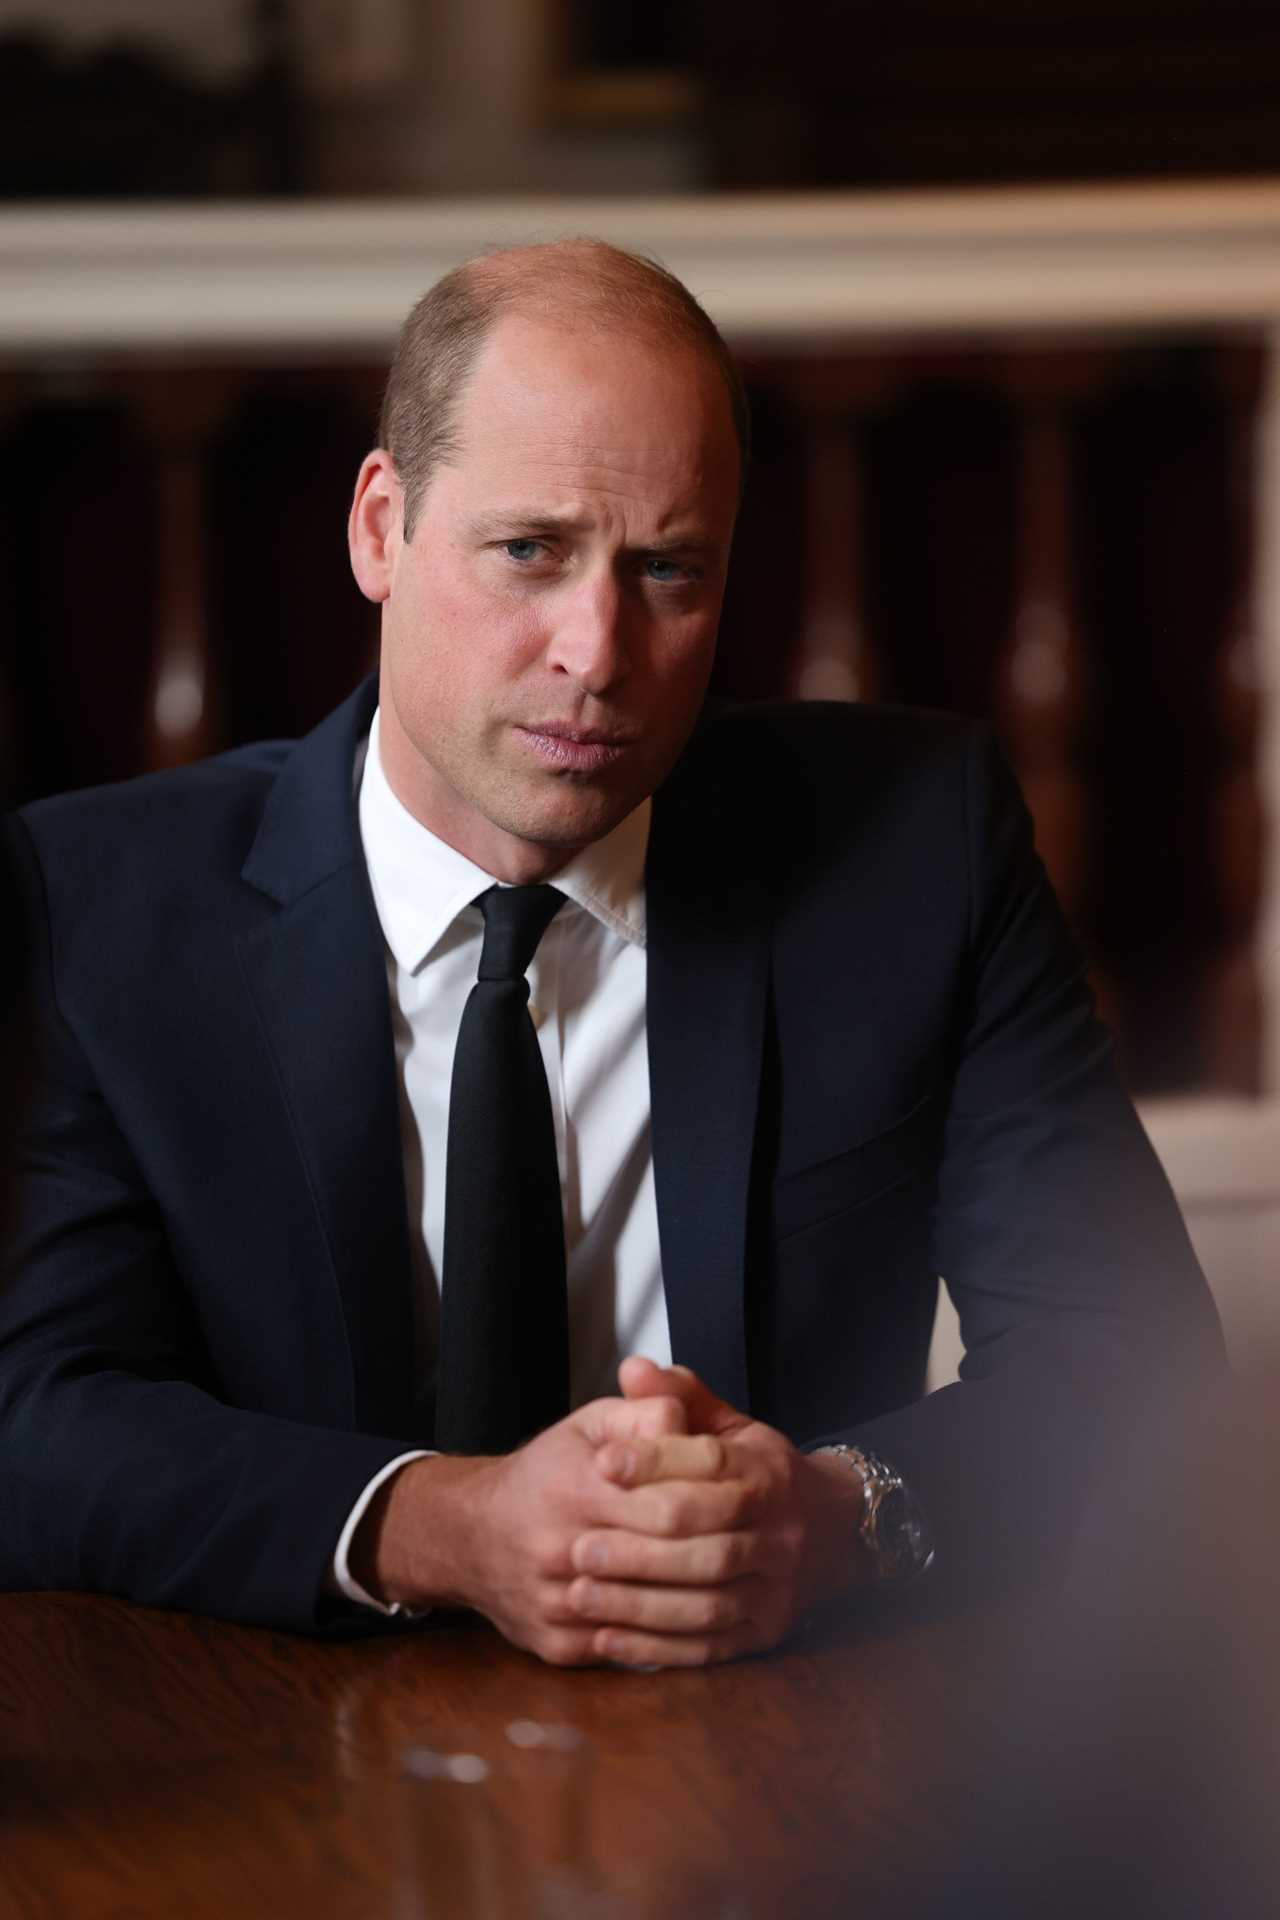 Prince William becomes his dad’s own landlord and will get £700K a year from The King’s beloved Highgrove home